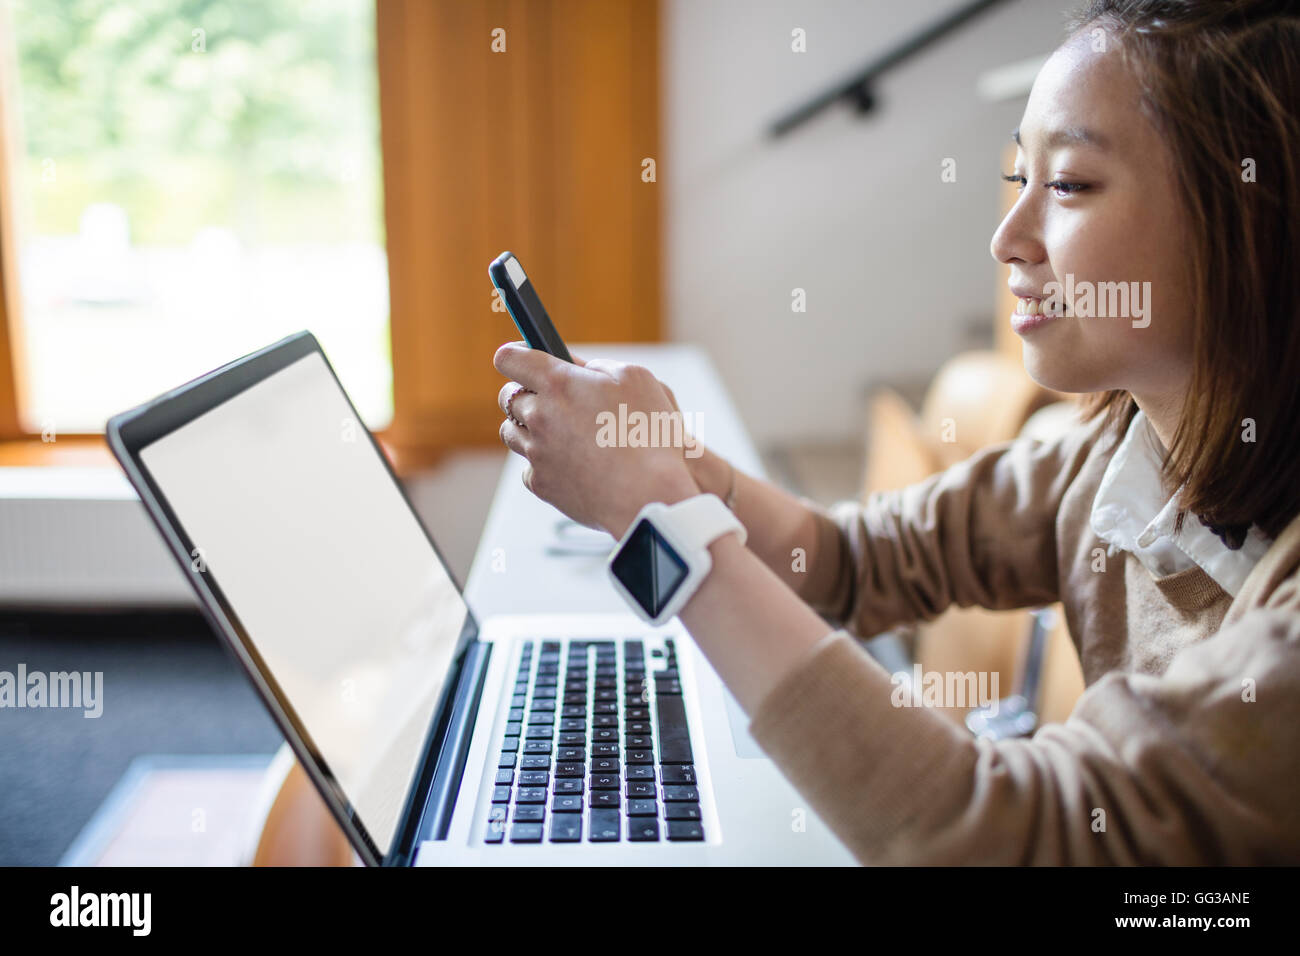 Young woman text message on mobile phone in classroom Stock Photo